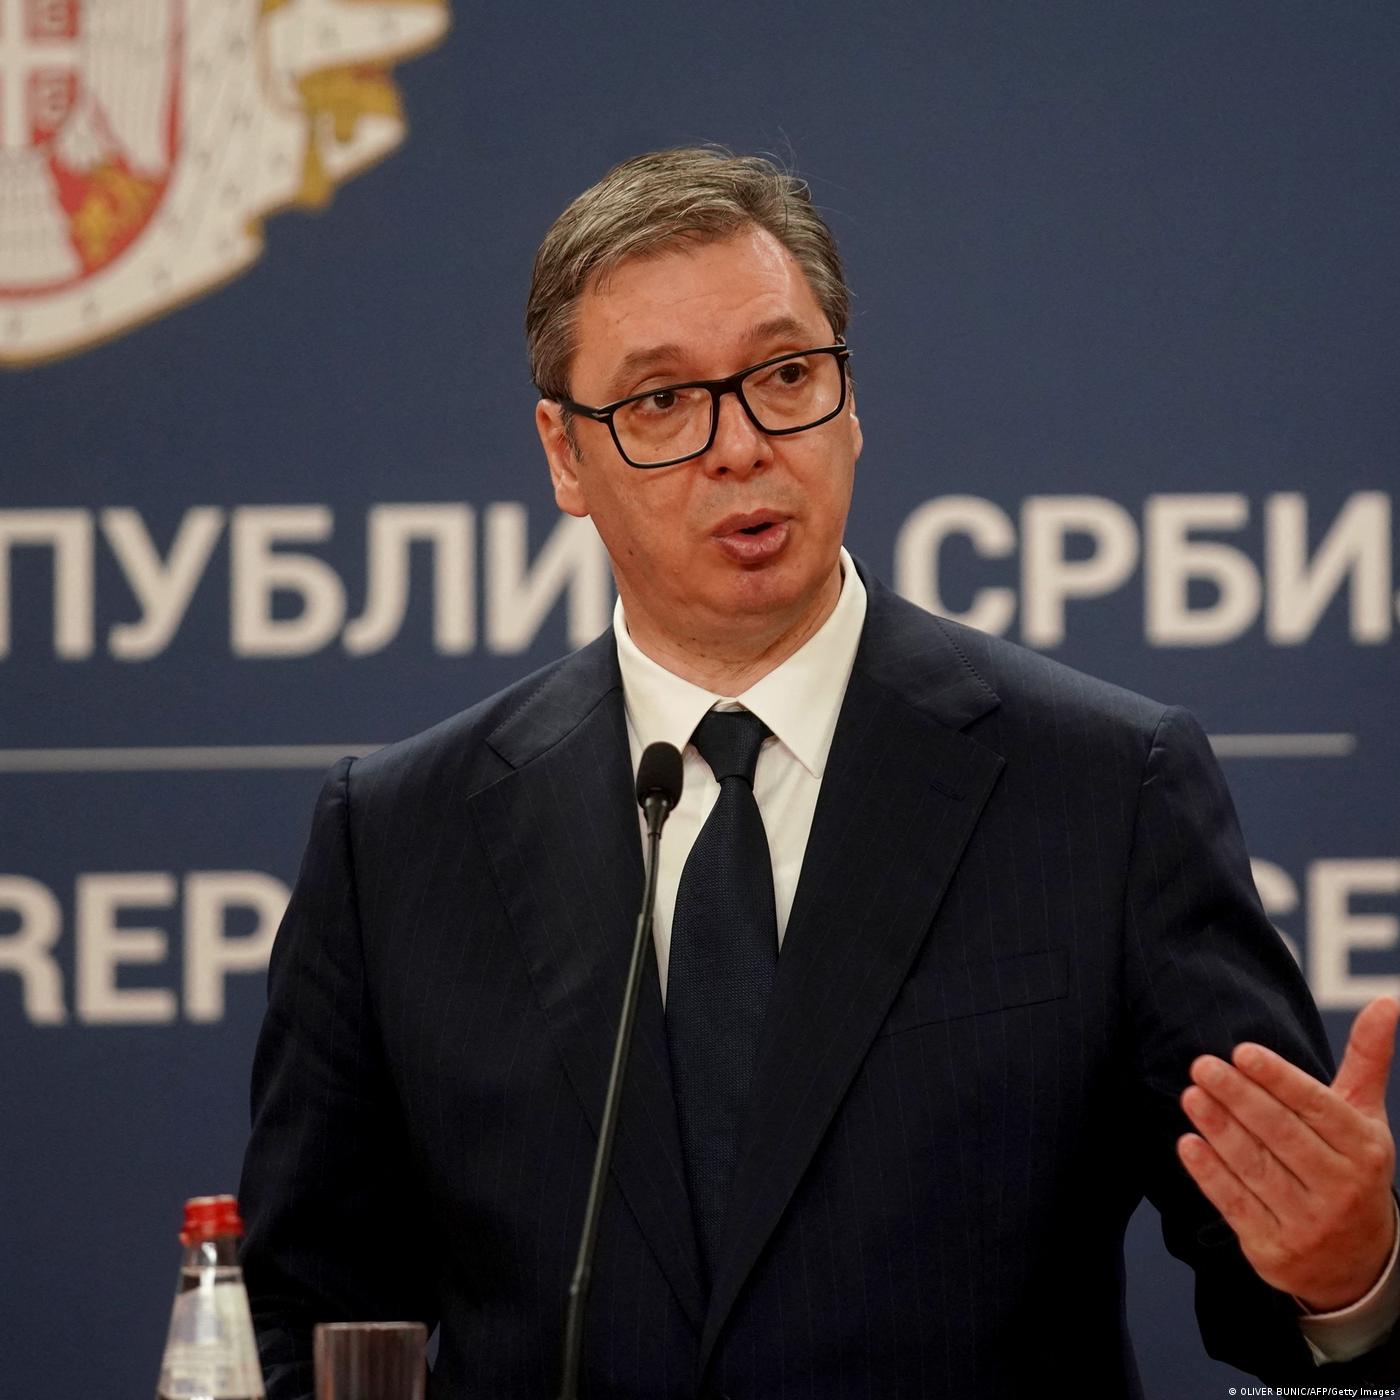 Serbia's election — is change on the horizon?